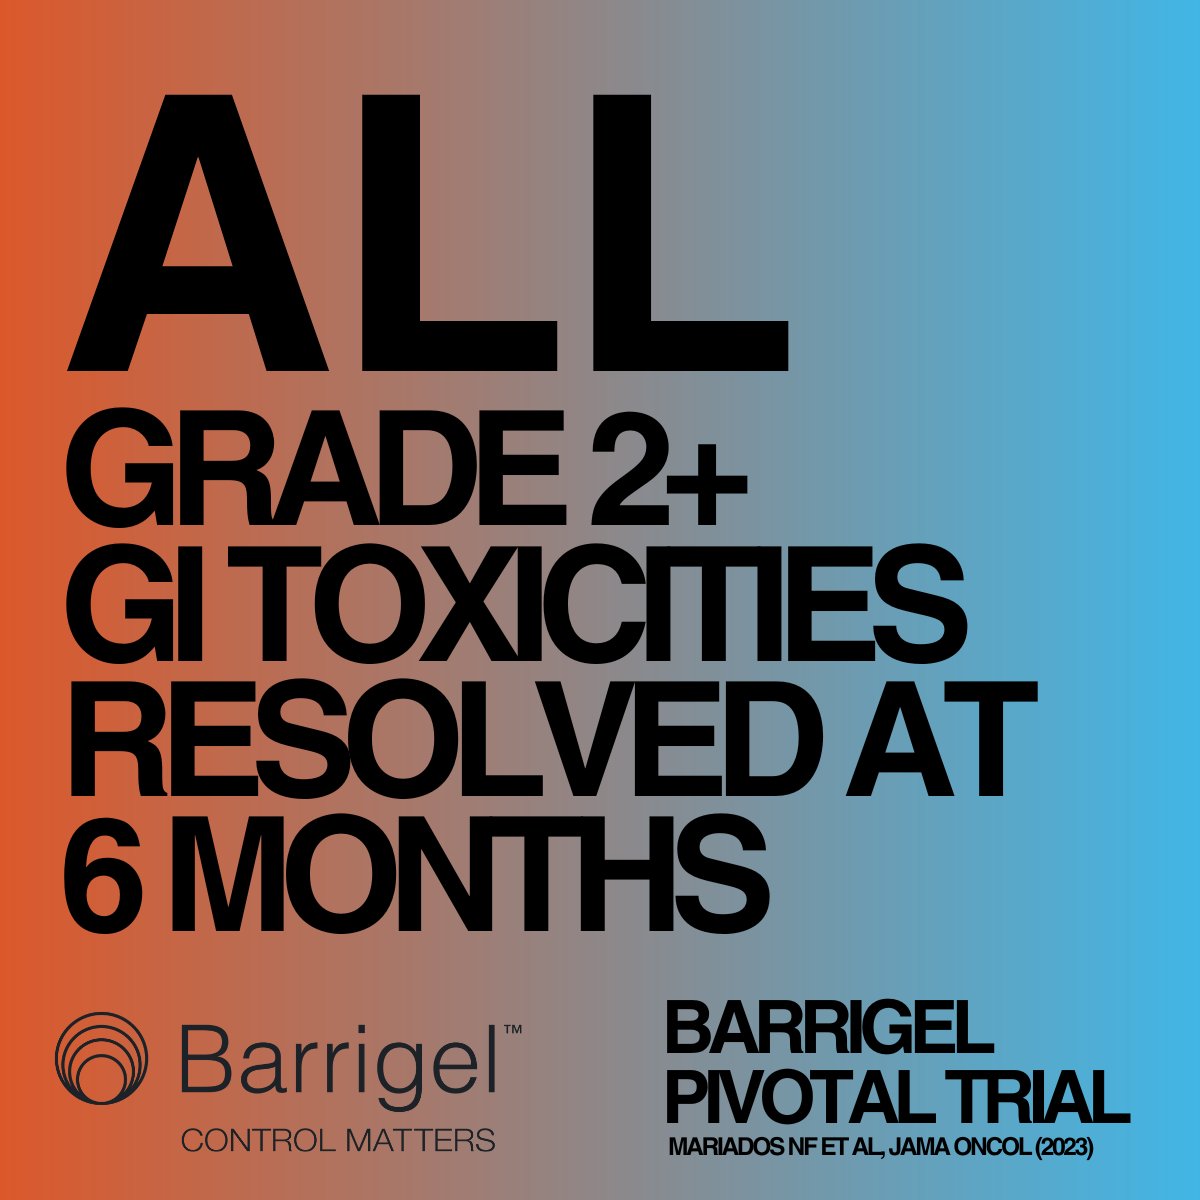 Did you know? In the Barrigel Pivotal Trial, all grade 2+ GI toxicities resolved at 6 months.

Read the paper: ow.ly/LbTx50RpGuR

Reference: Mariados NF, Orio PF III, Schiffman Z et al. Hyaluronic acid spacer for hypofractionated prostate radiation therapy: A randomized…